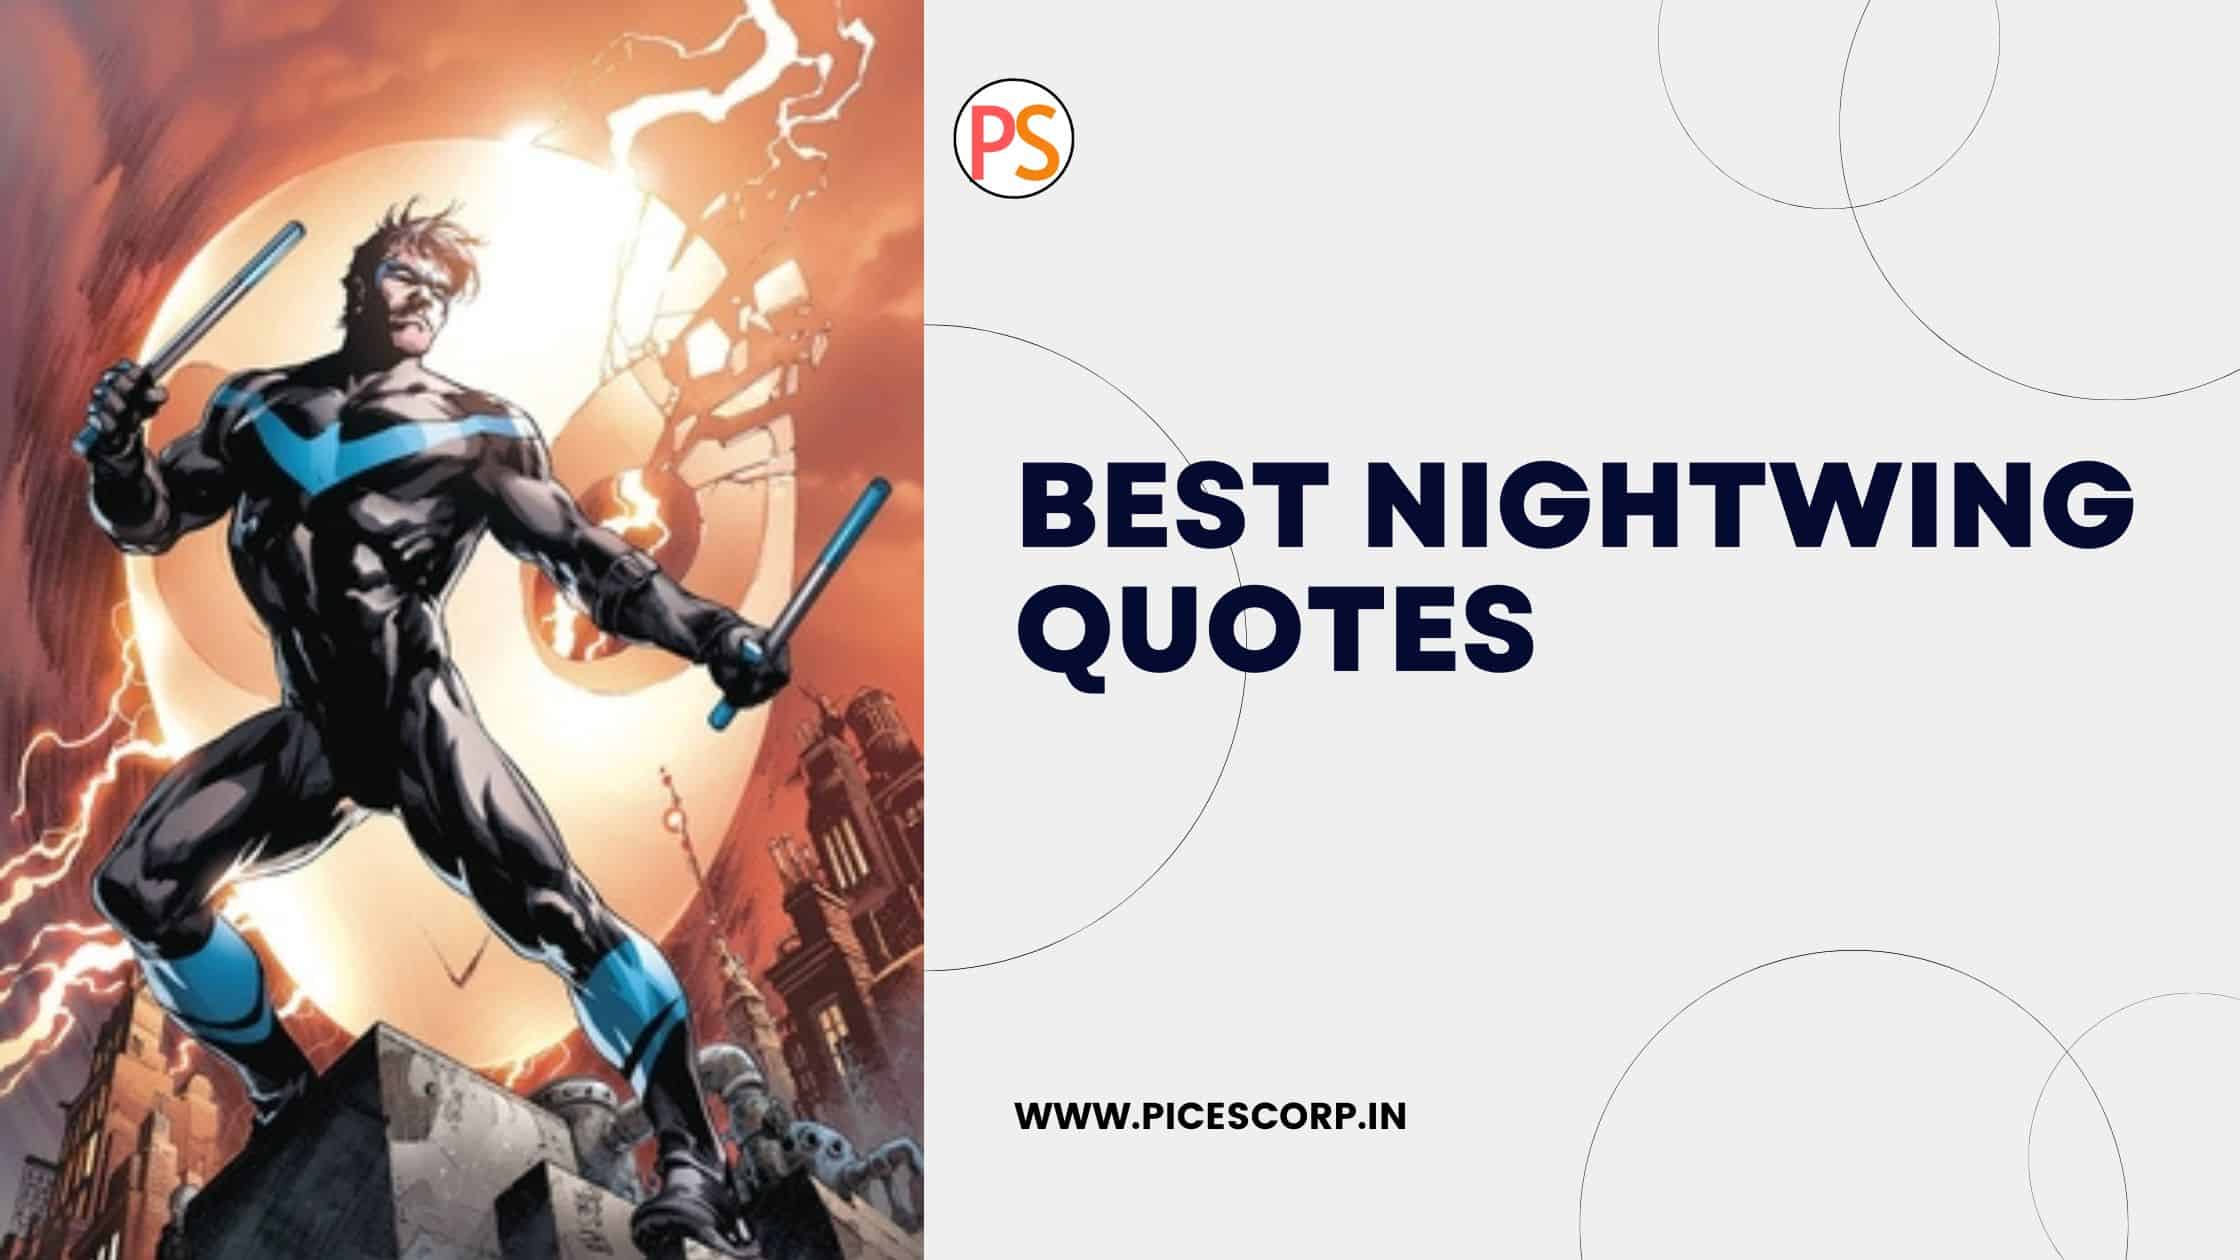 Best Nightwing quotes